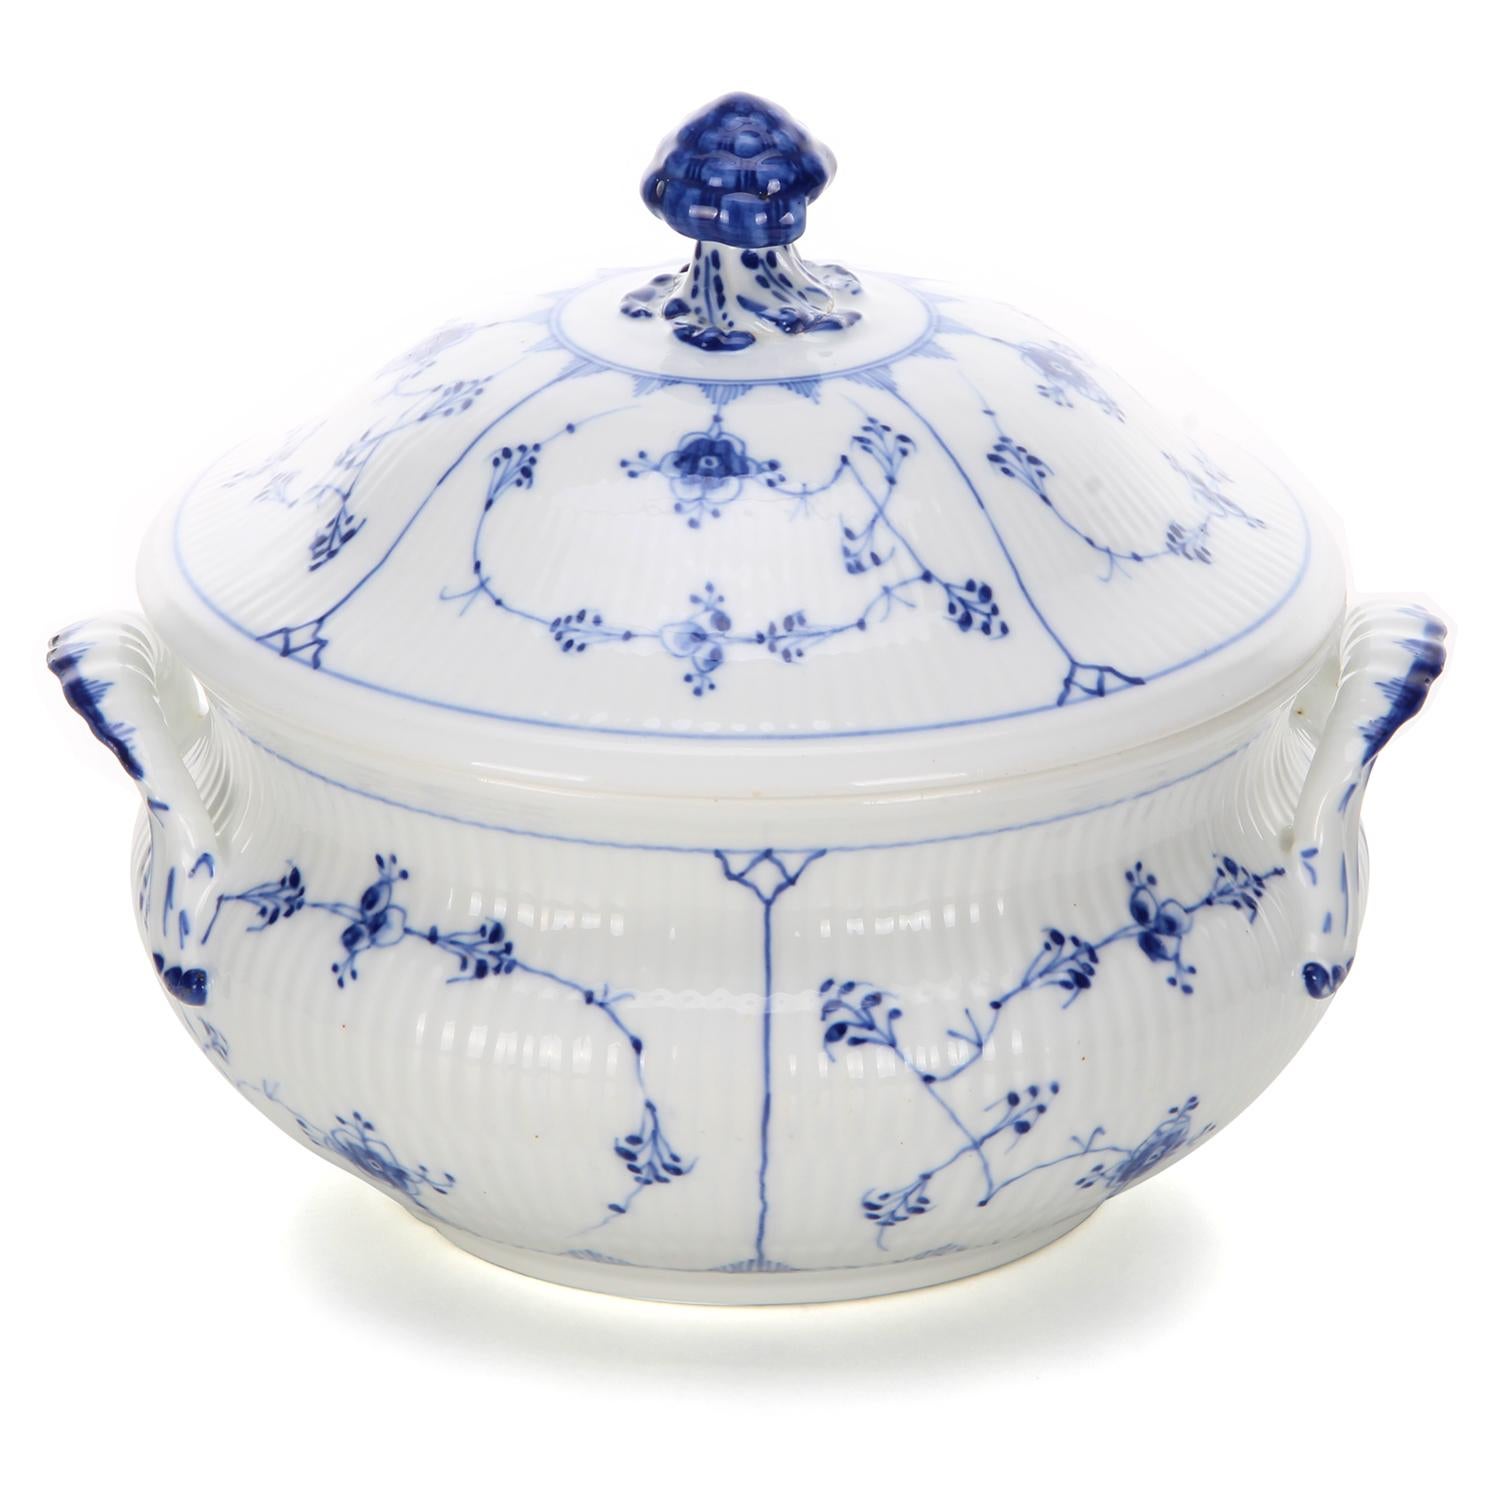 Soup Tureen, no. 222 by Royal Copenhagen from circa 1900 - large antique Danish blue fluted plain porcelain bowl in good vintage condition.

A truly beautiful serving dish in white glazed porcelain with matching lid, both decorated with cobalt